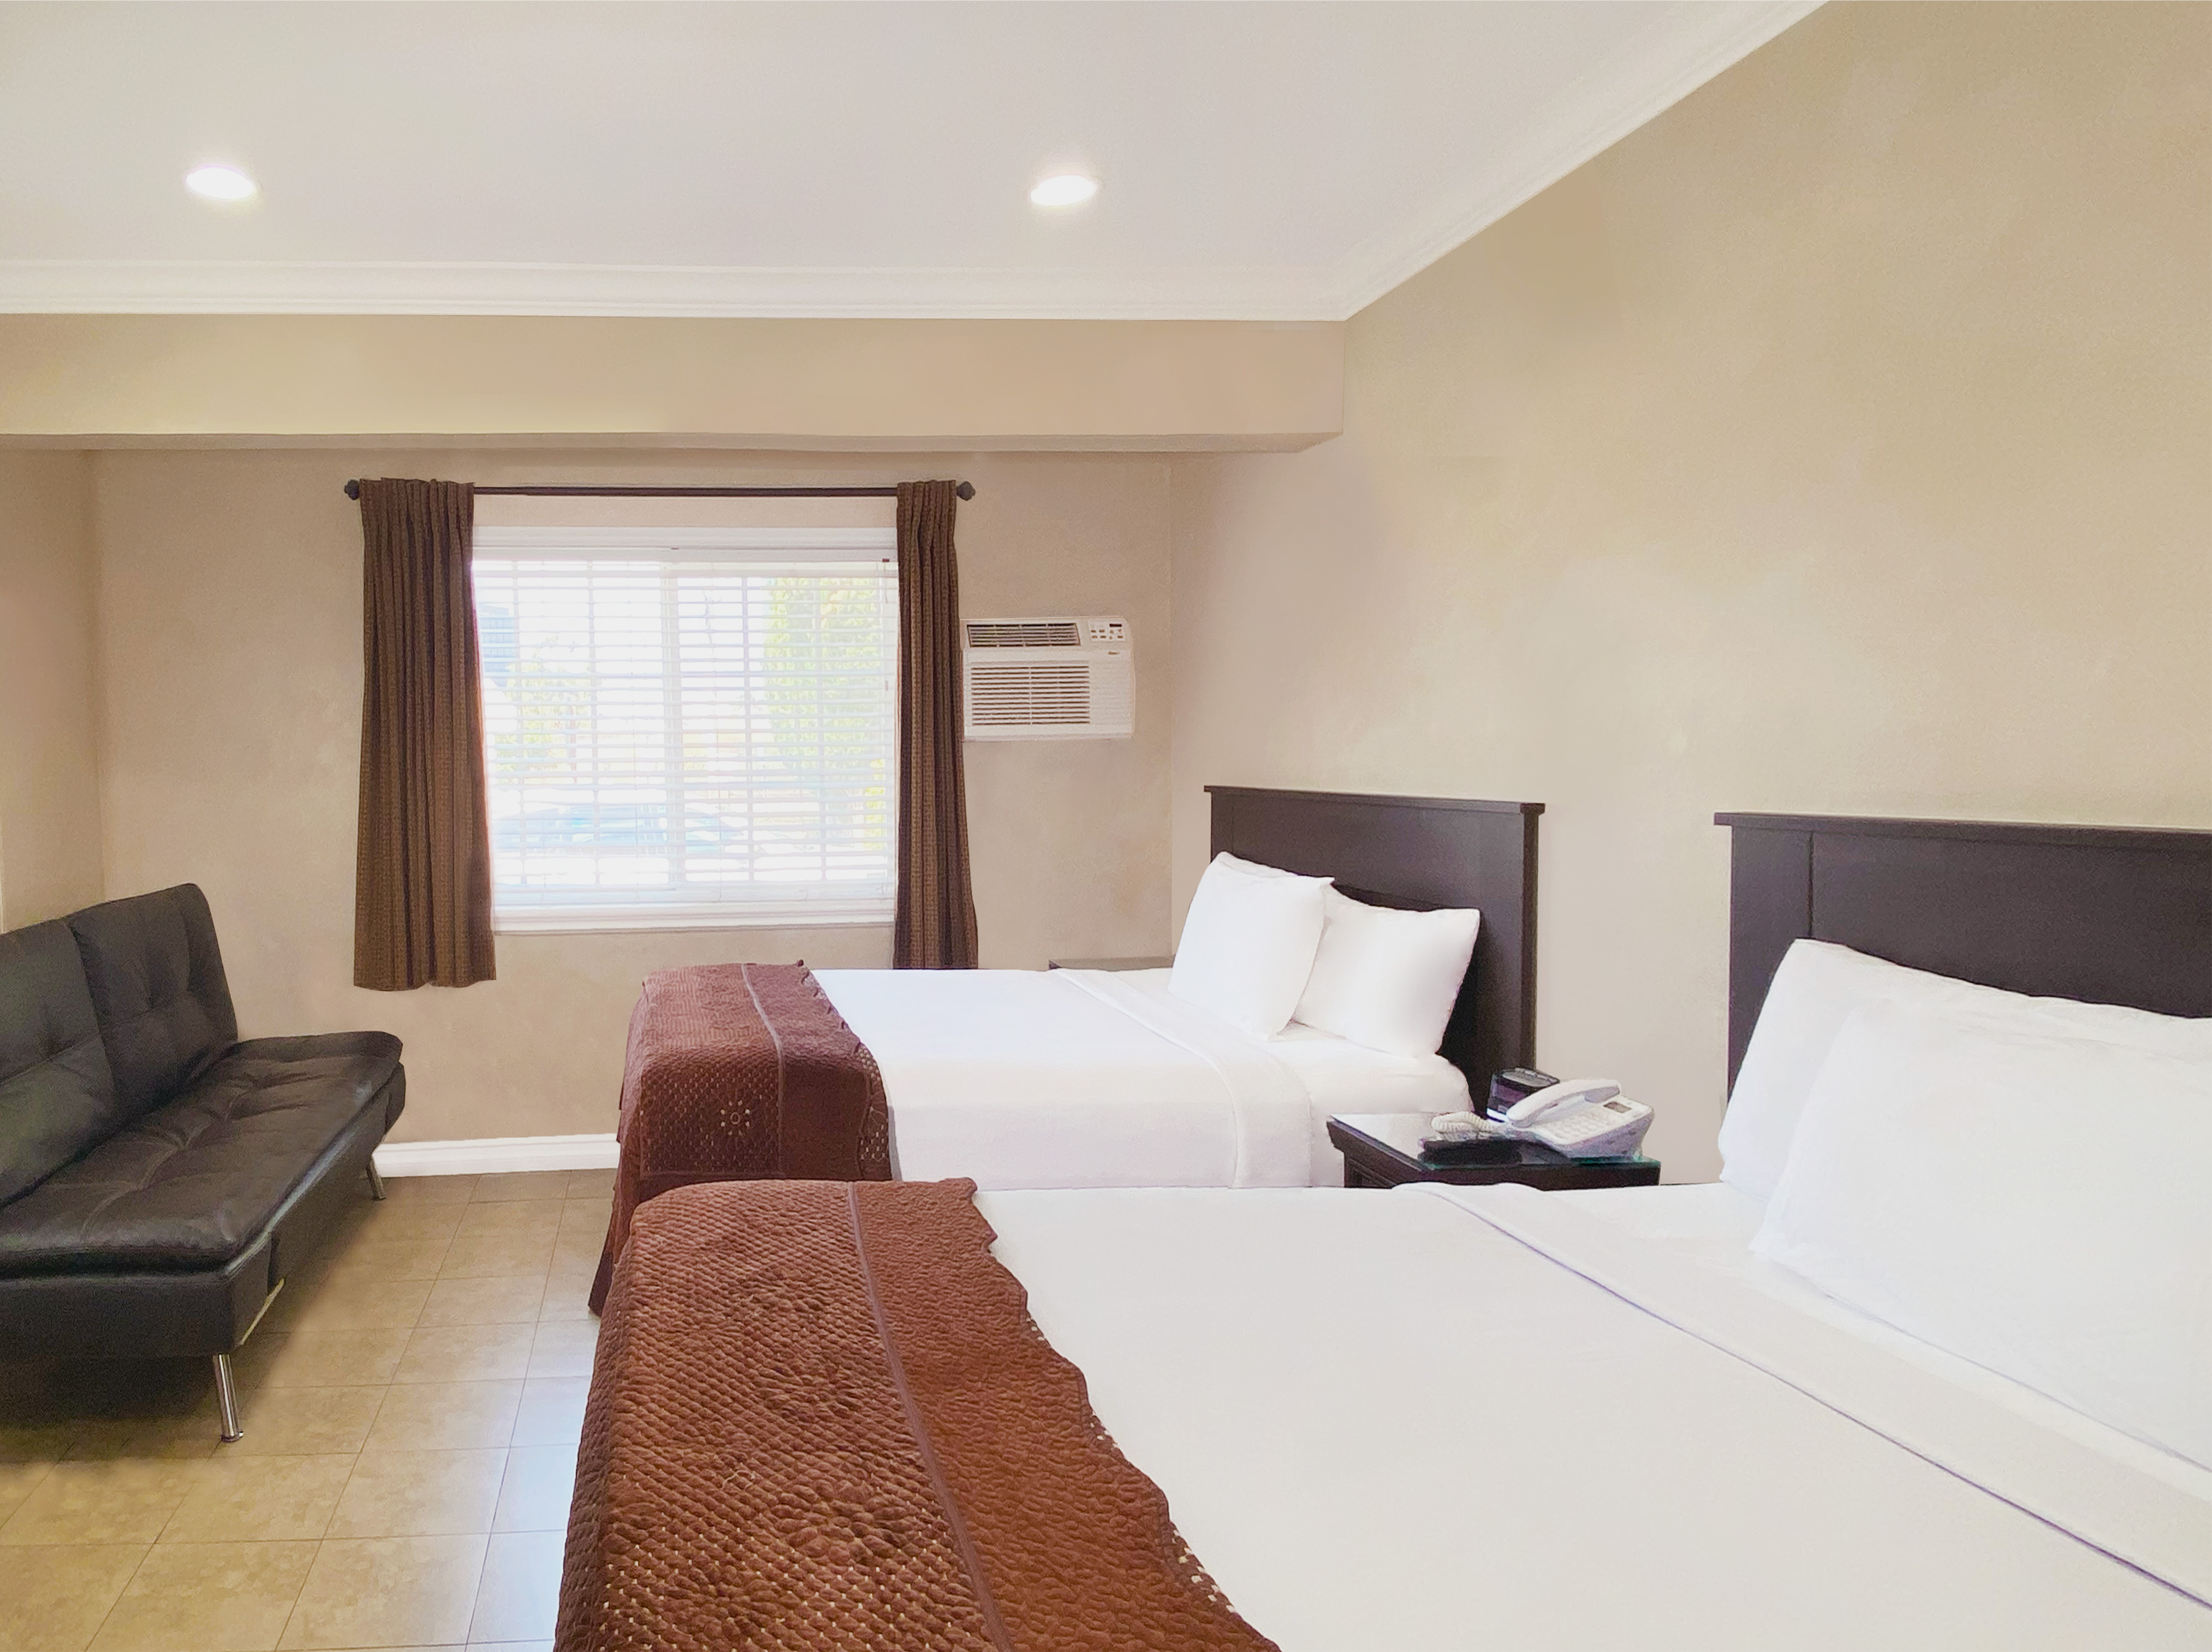 Hourly Motels In North Hollywood Ca